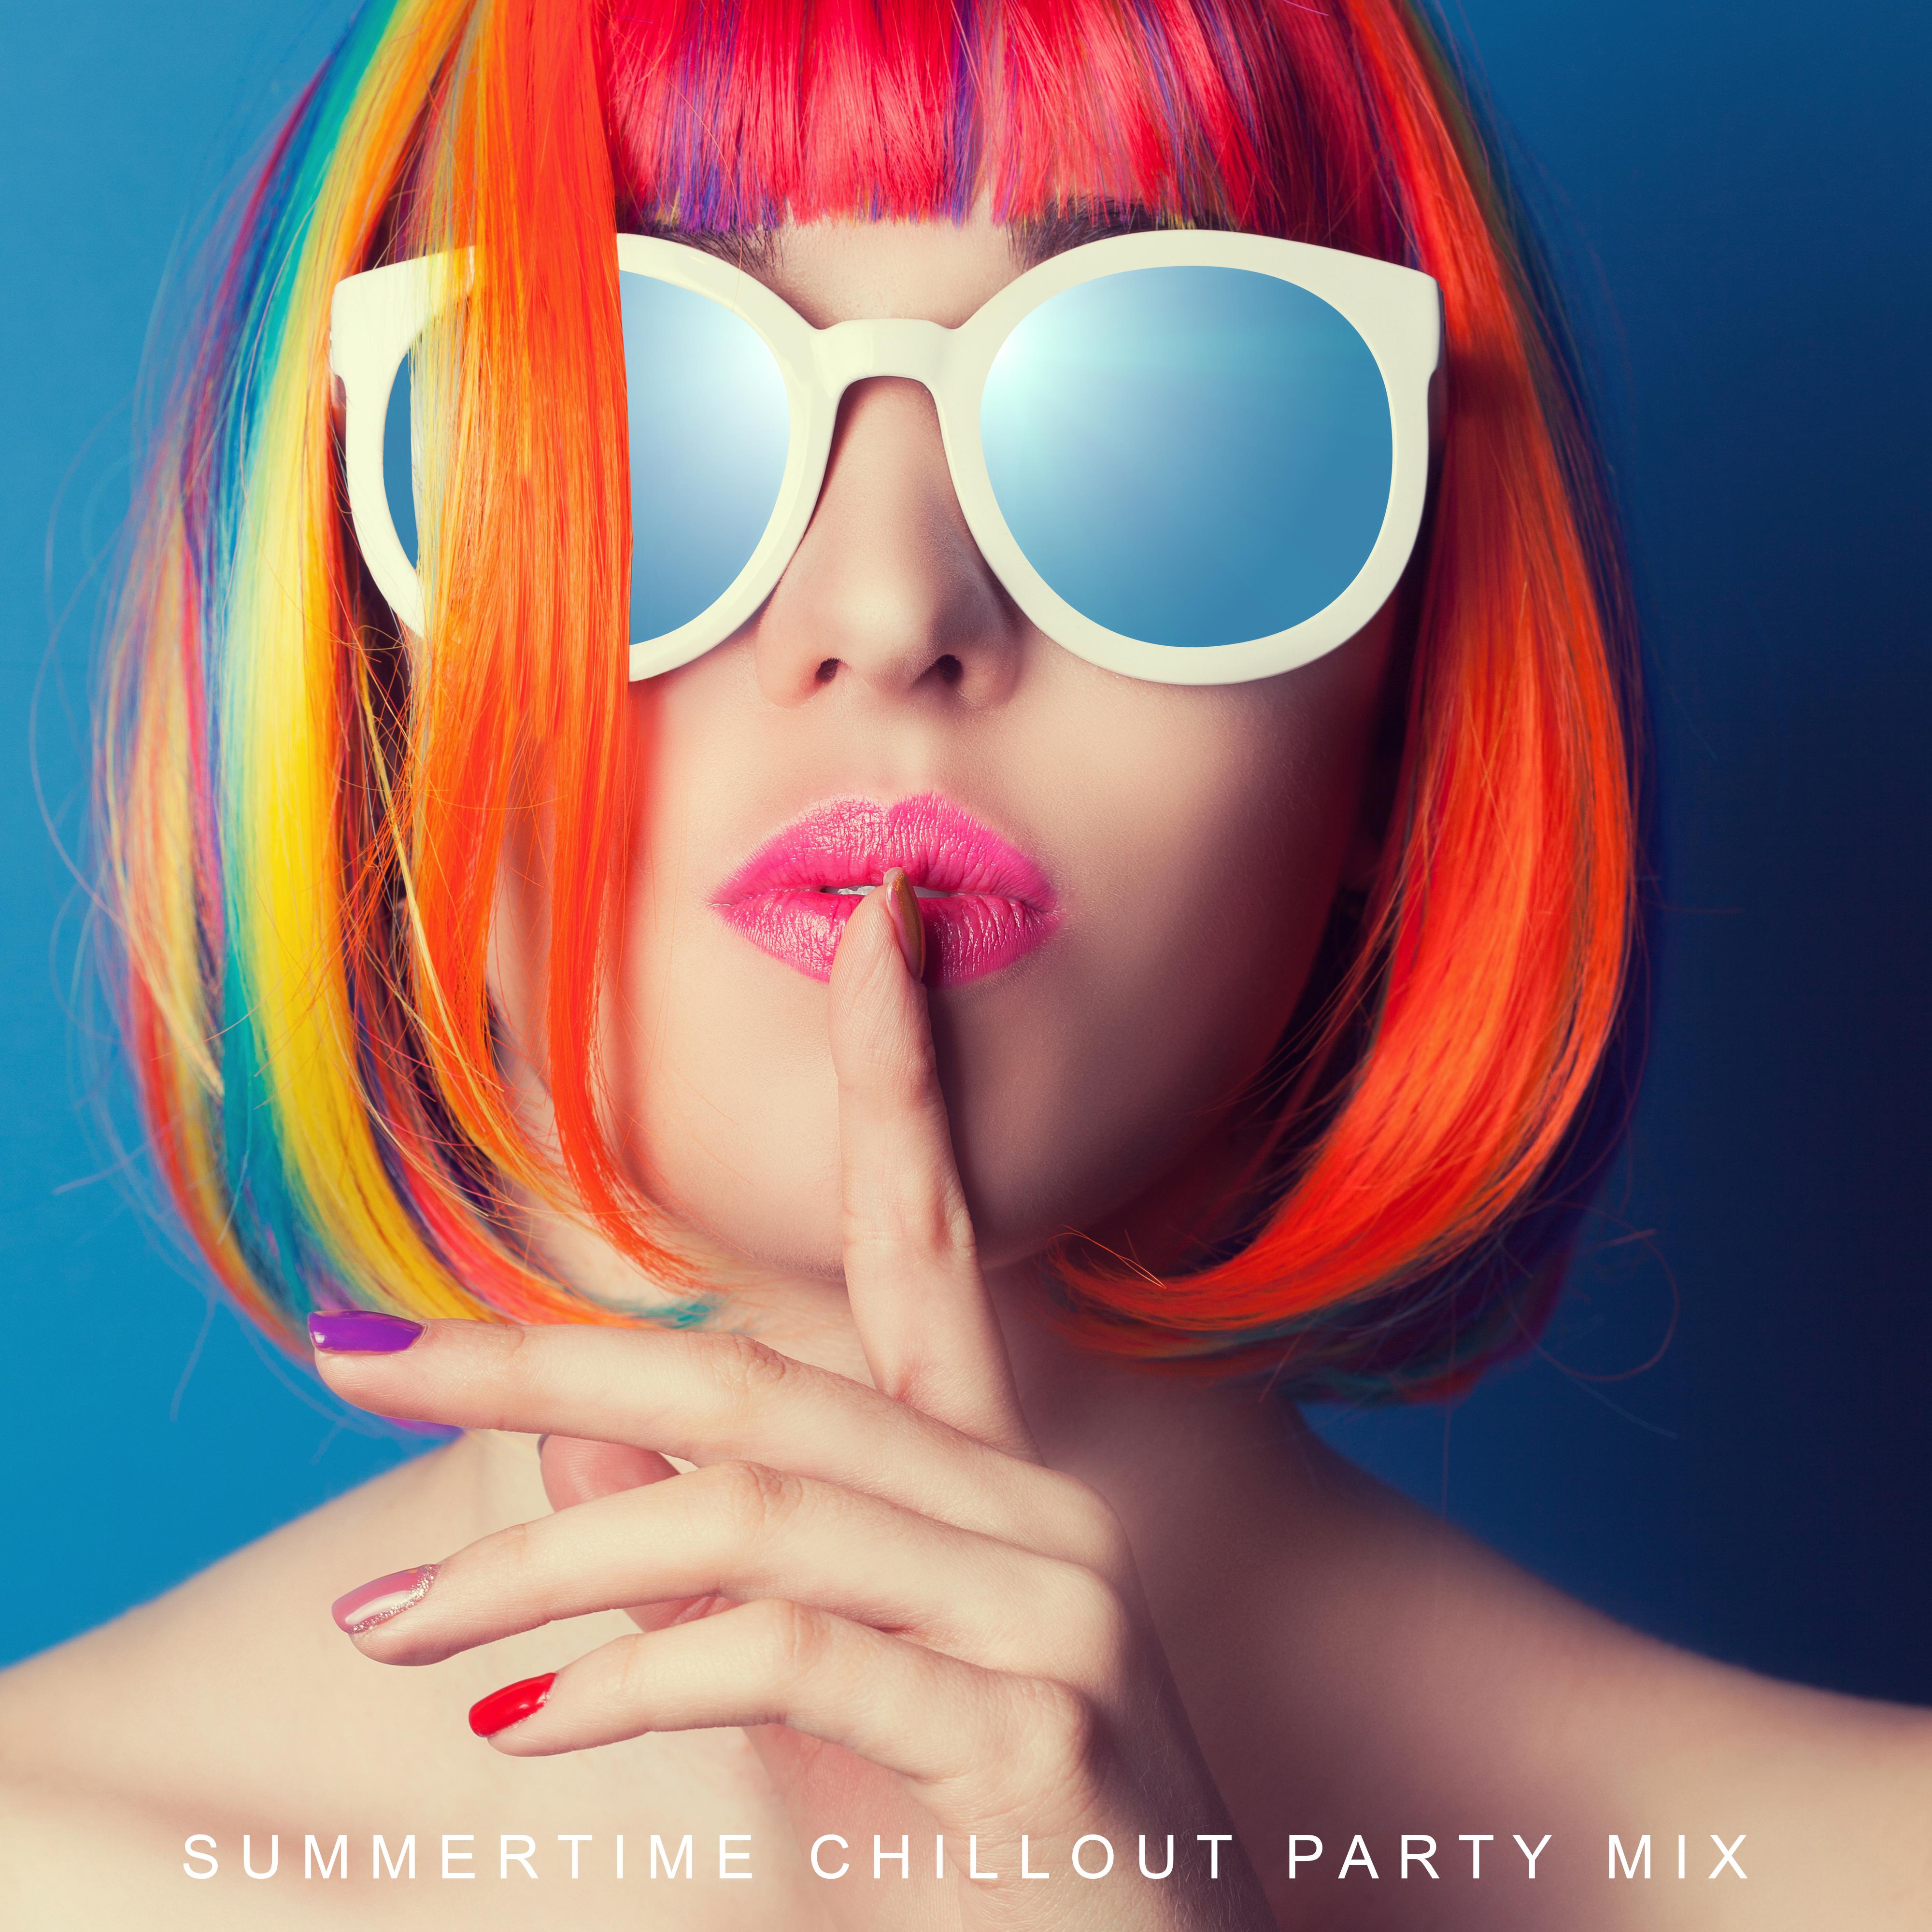 Summertime Chillout Party Mix: Selection of Best Low BPM Electronic Music for Poolside Party, Tropical Vacatiion Celebration Songs, Summer Holiday Compilation